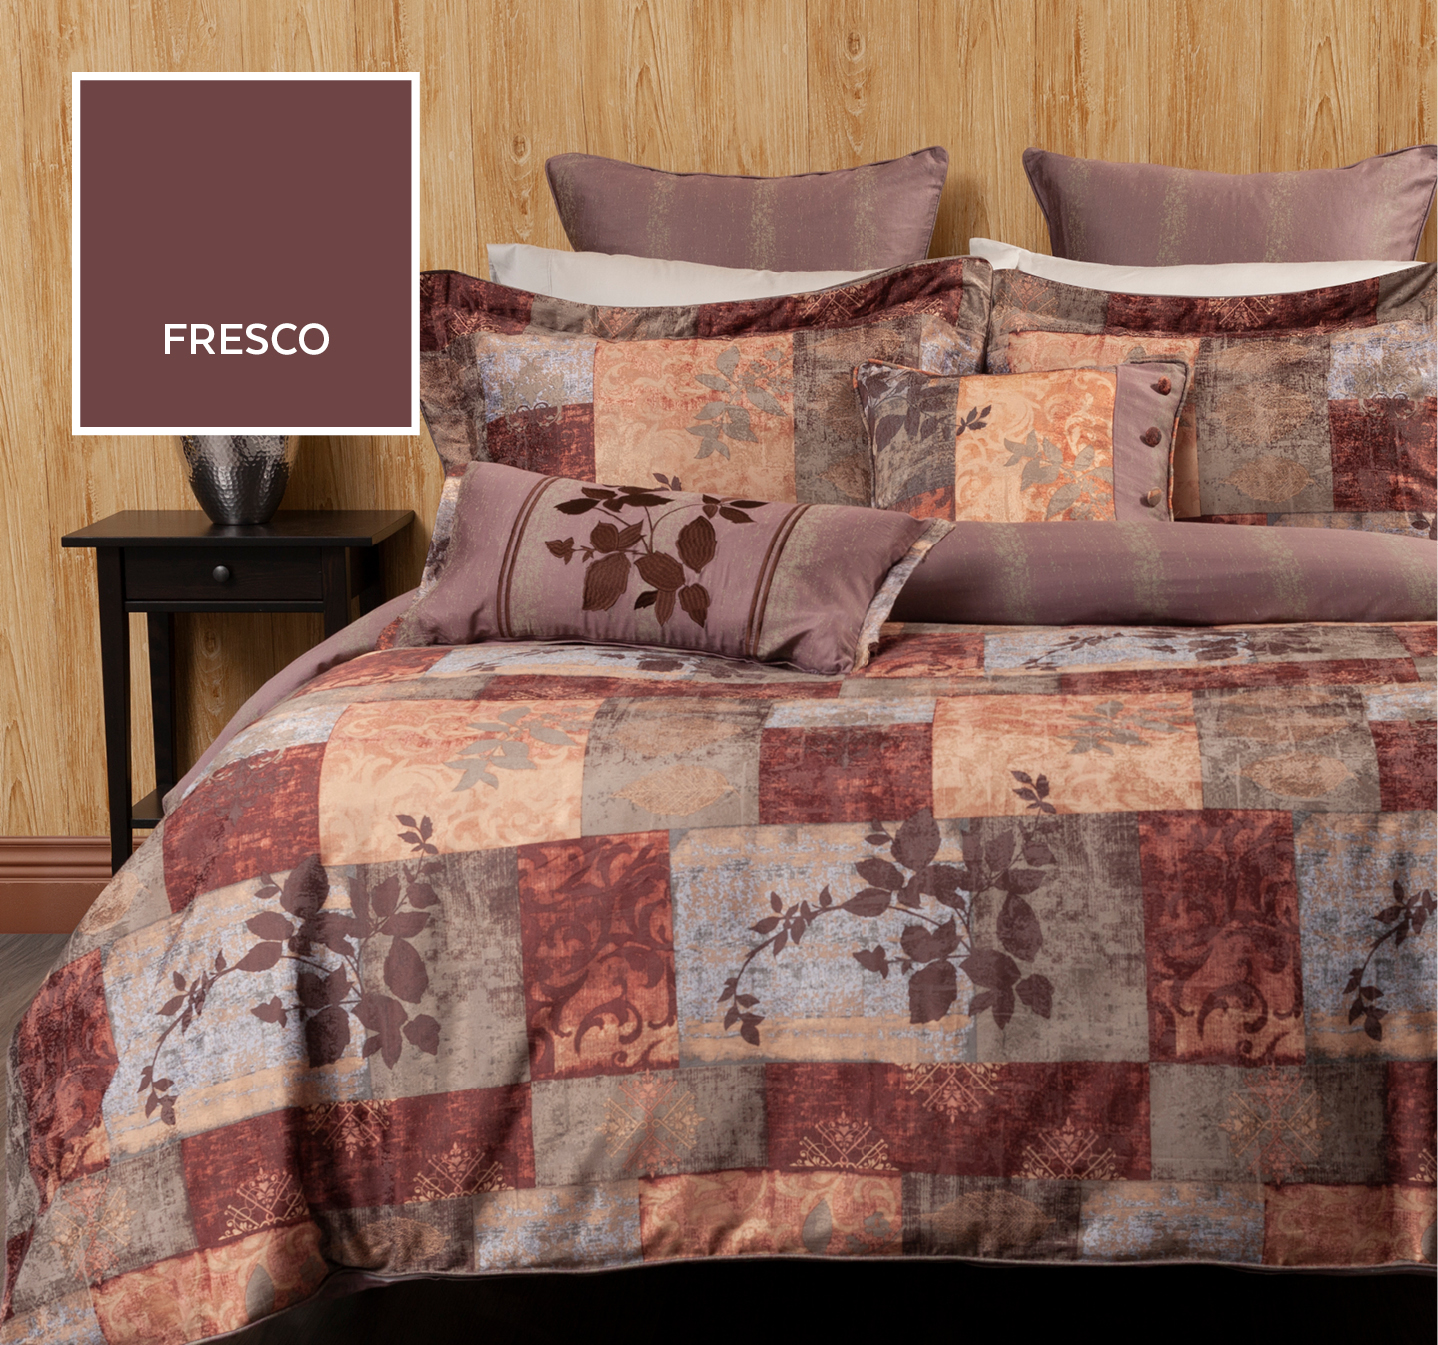 Fresco Duvet Cover with Brown and Taupe Print